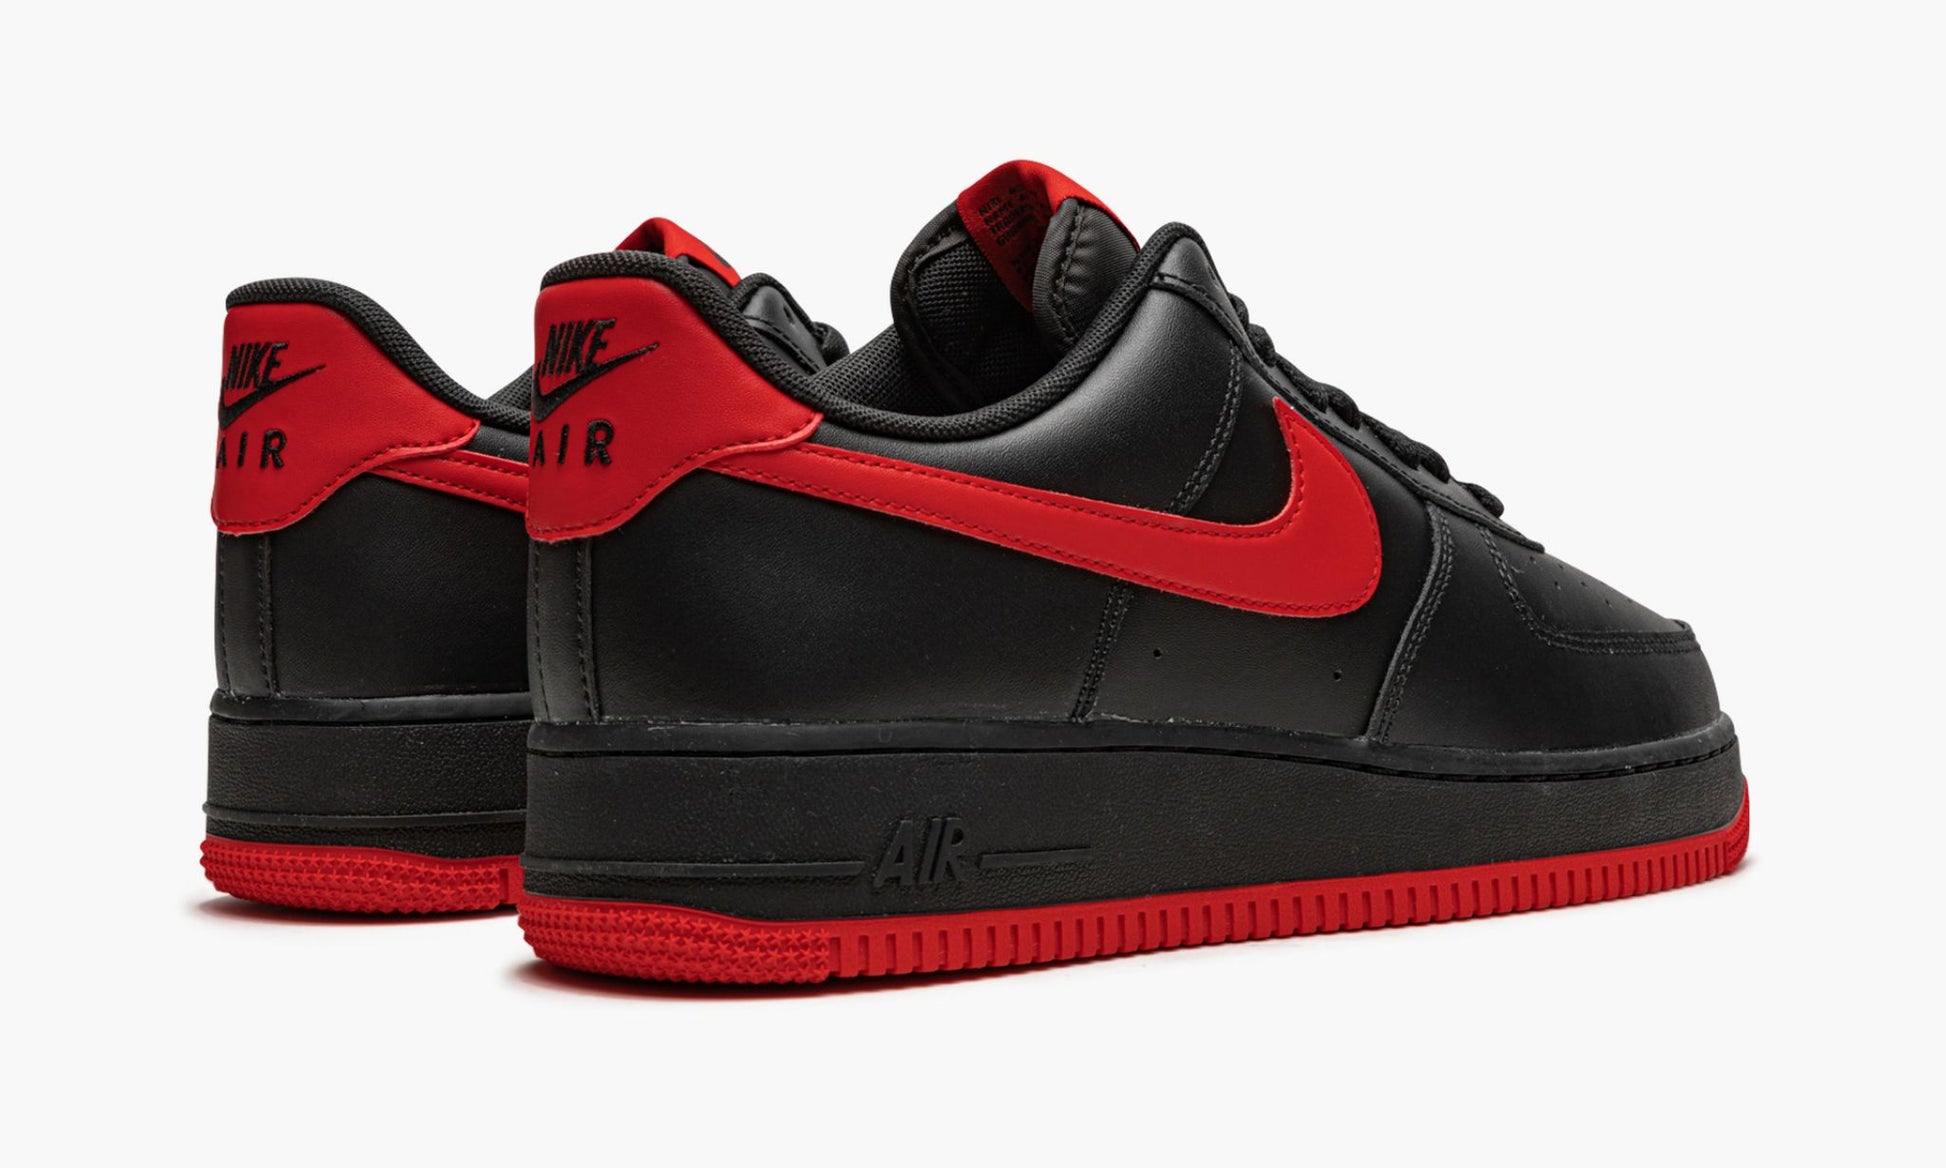 Air Force 1 Low '07 "Bred"